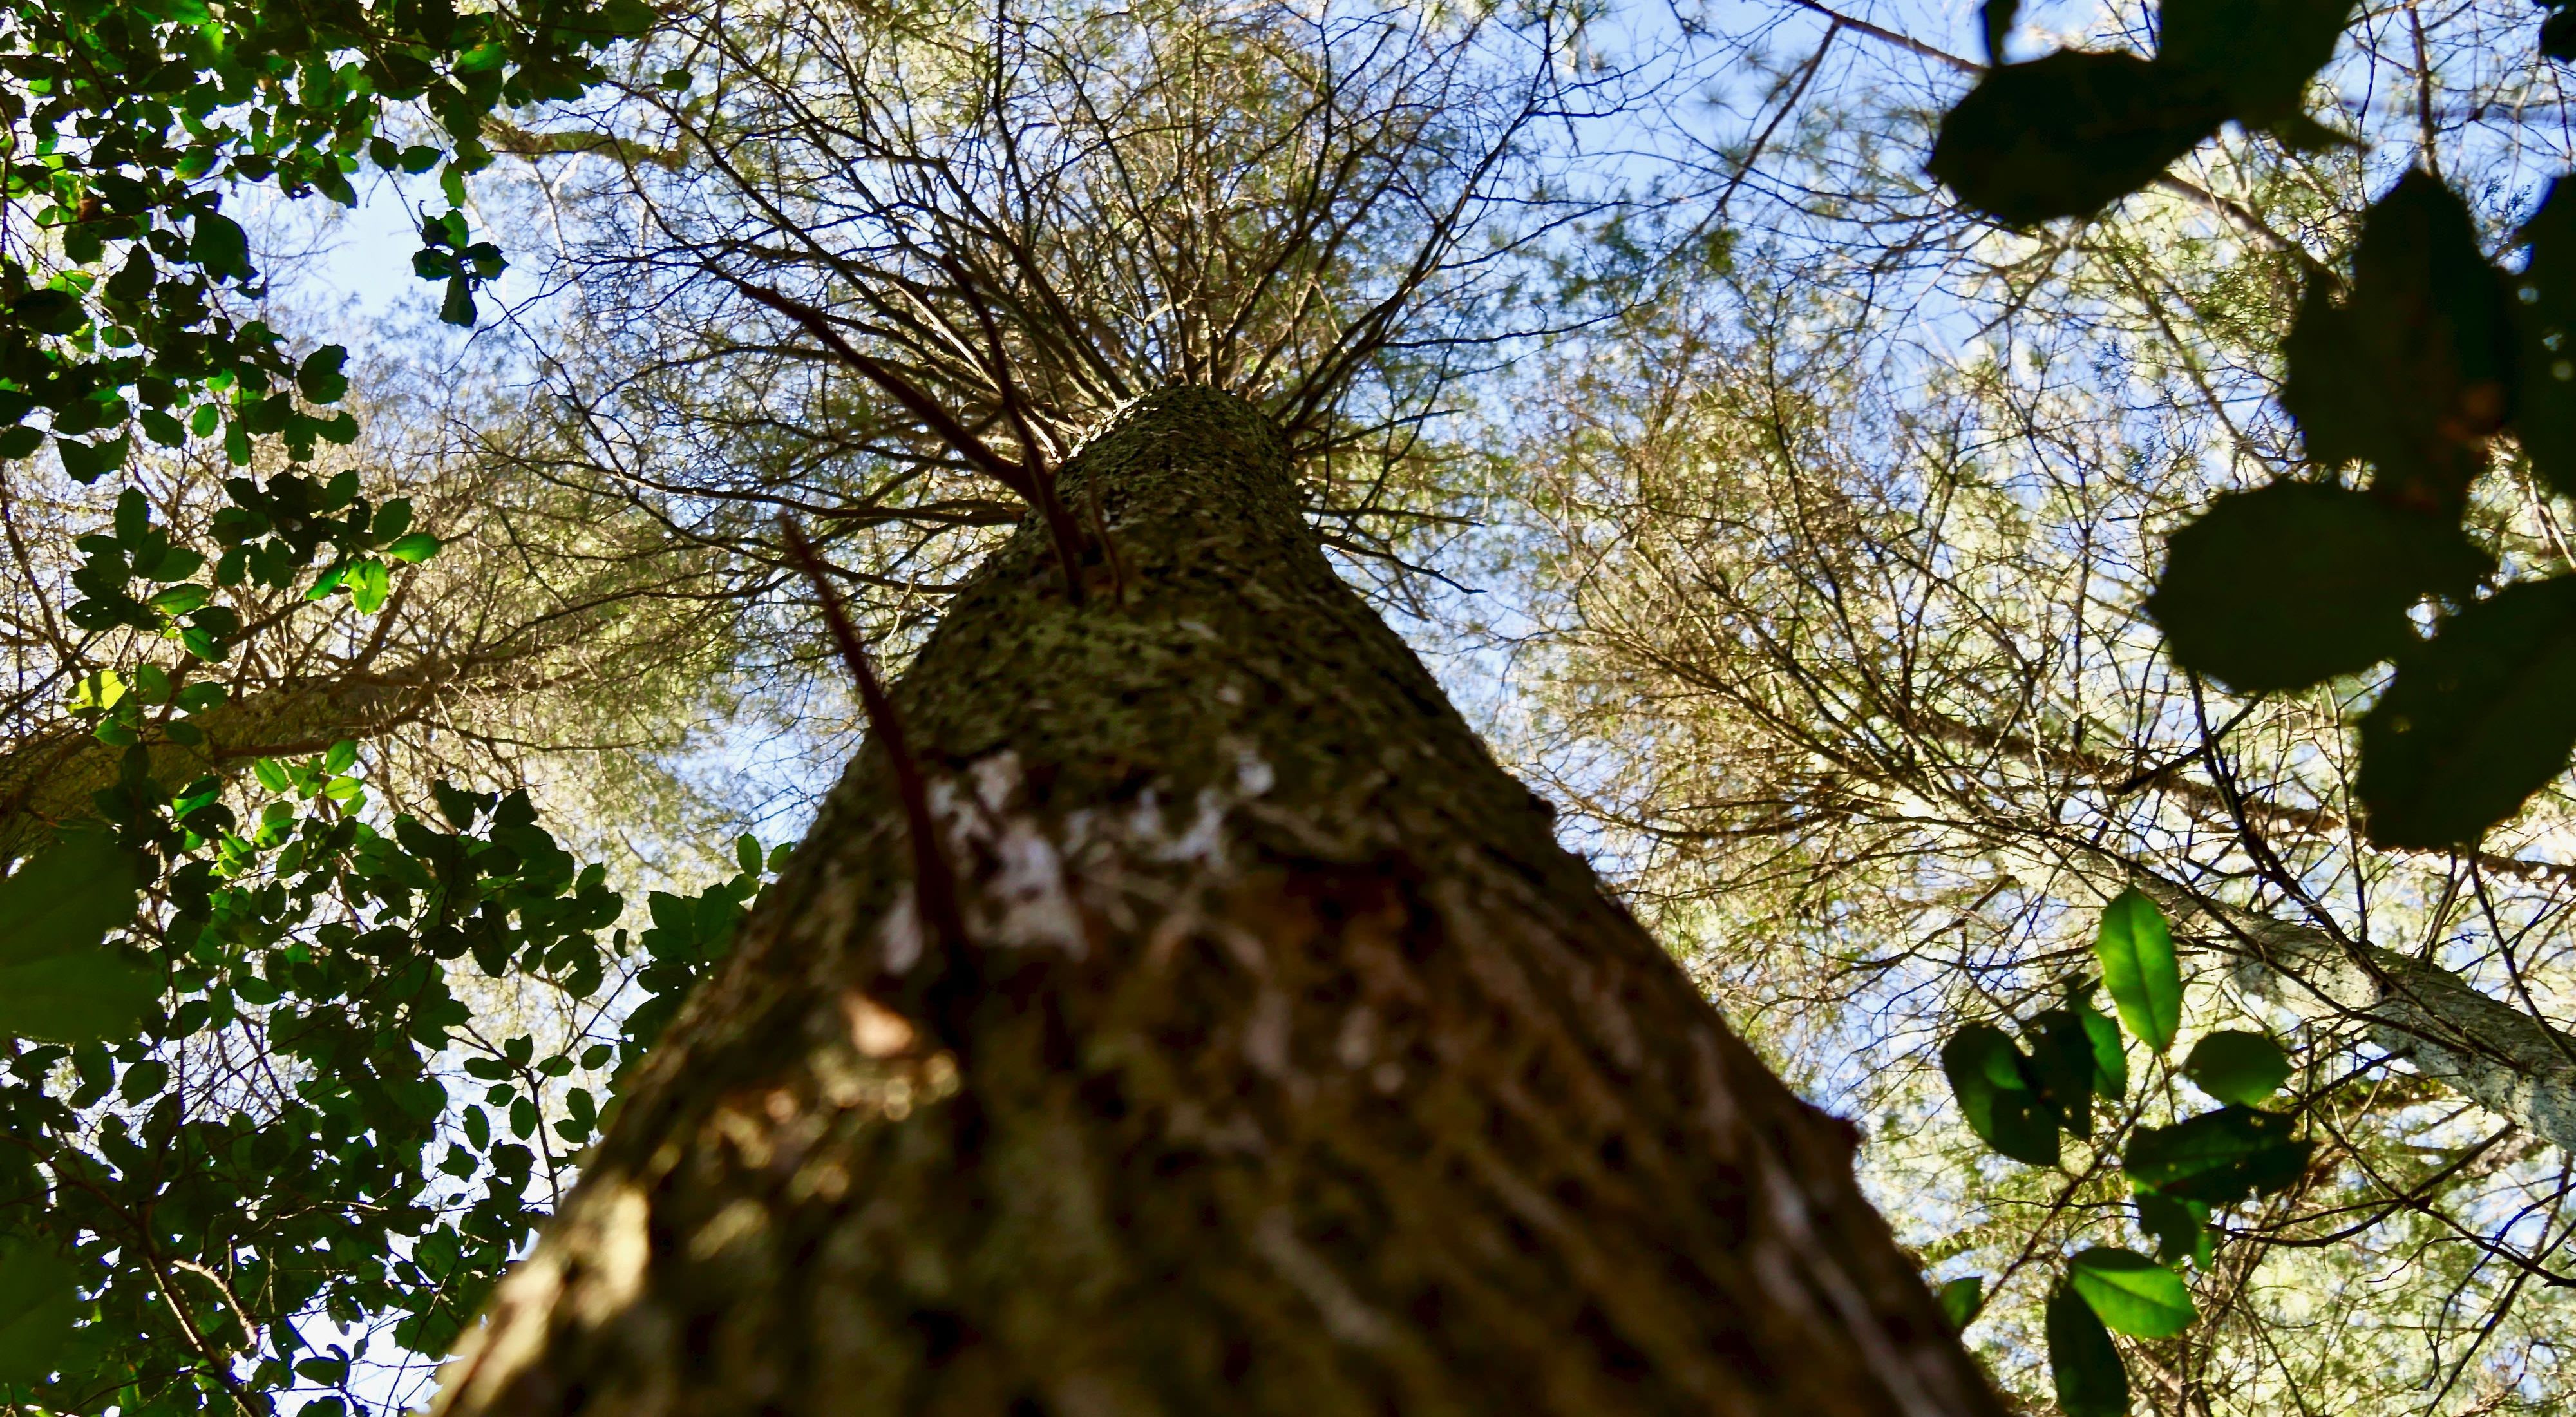 Looking up along the rough bark of an Atlantic White cedar tree into the spreading branches of its crown.